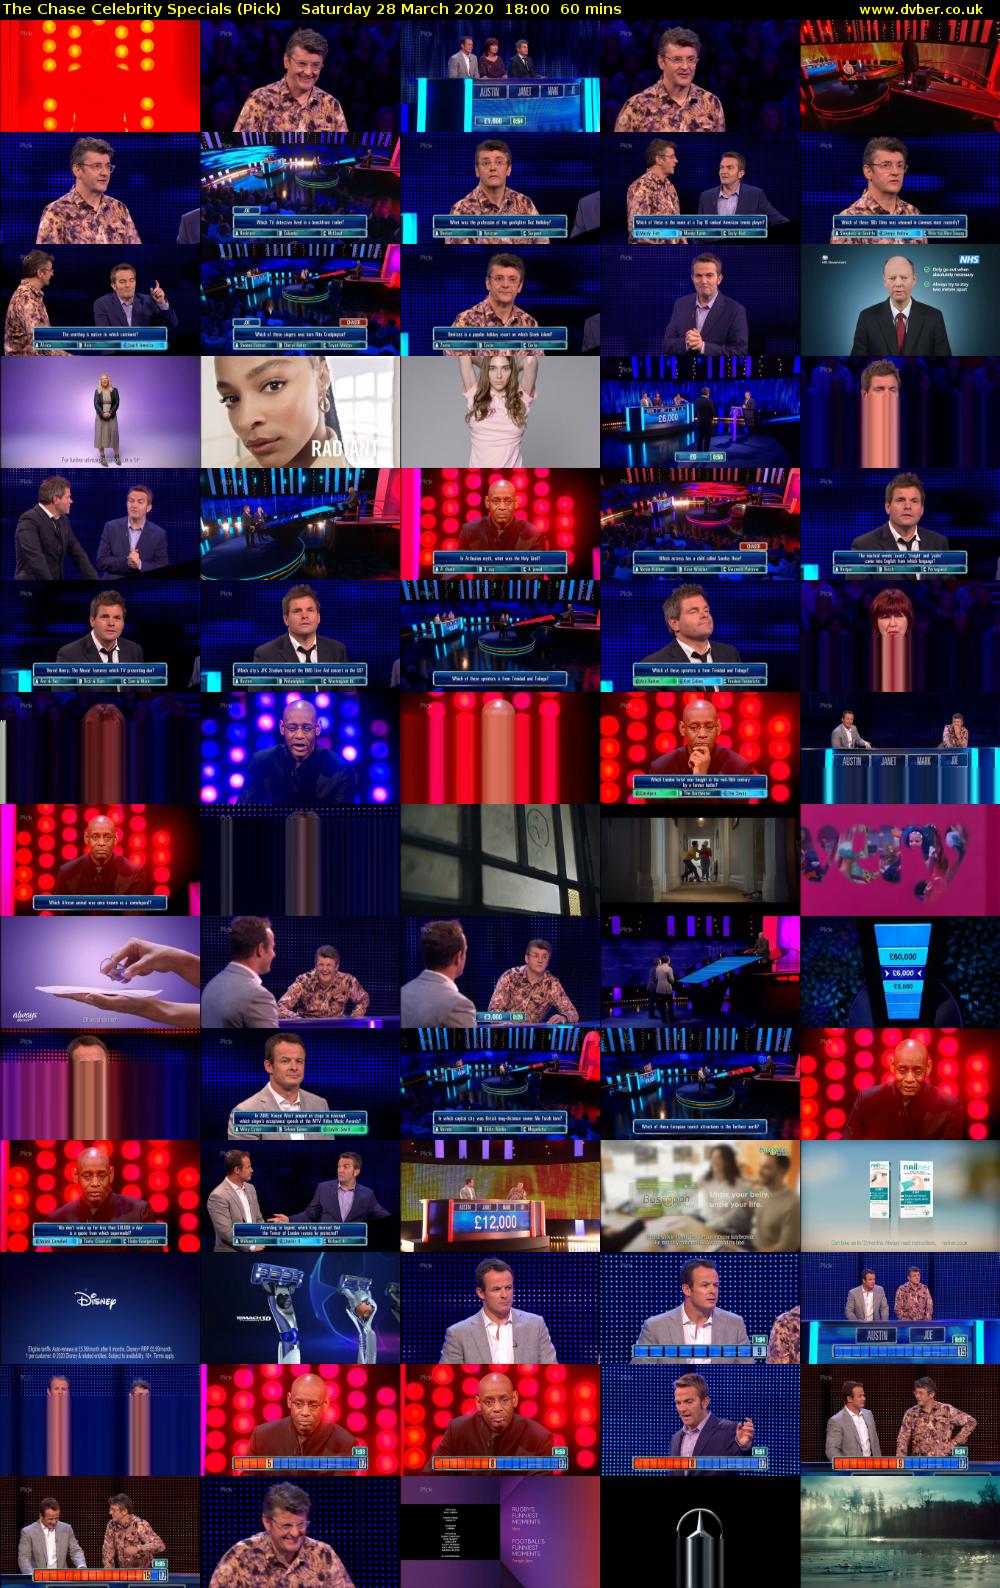 The Chase Celebrity Specials (Pick) Saturday 28 March 2020 18:00 - 19:00